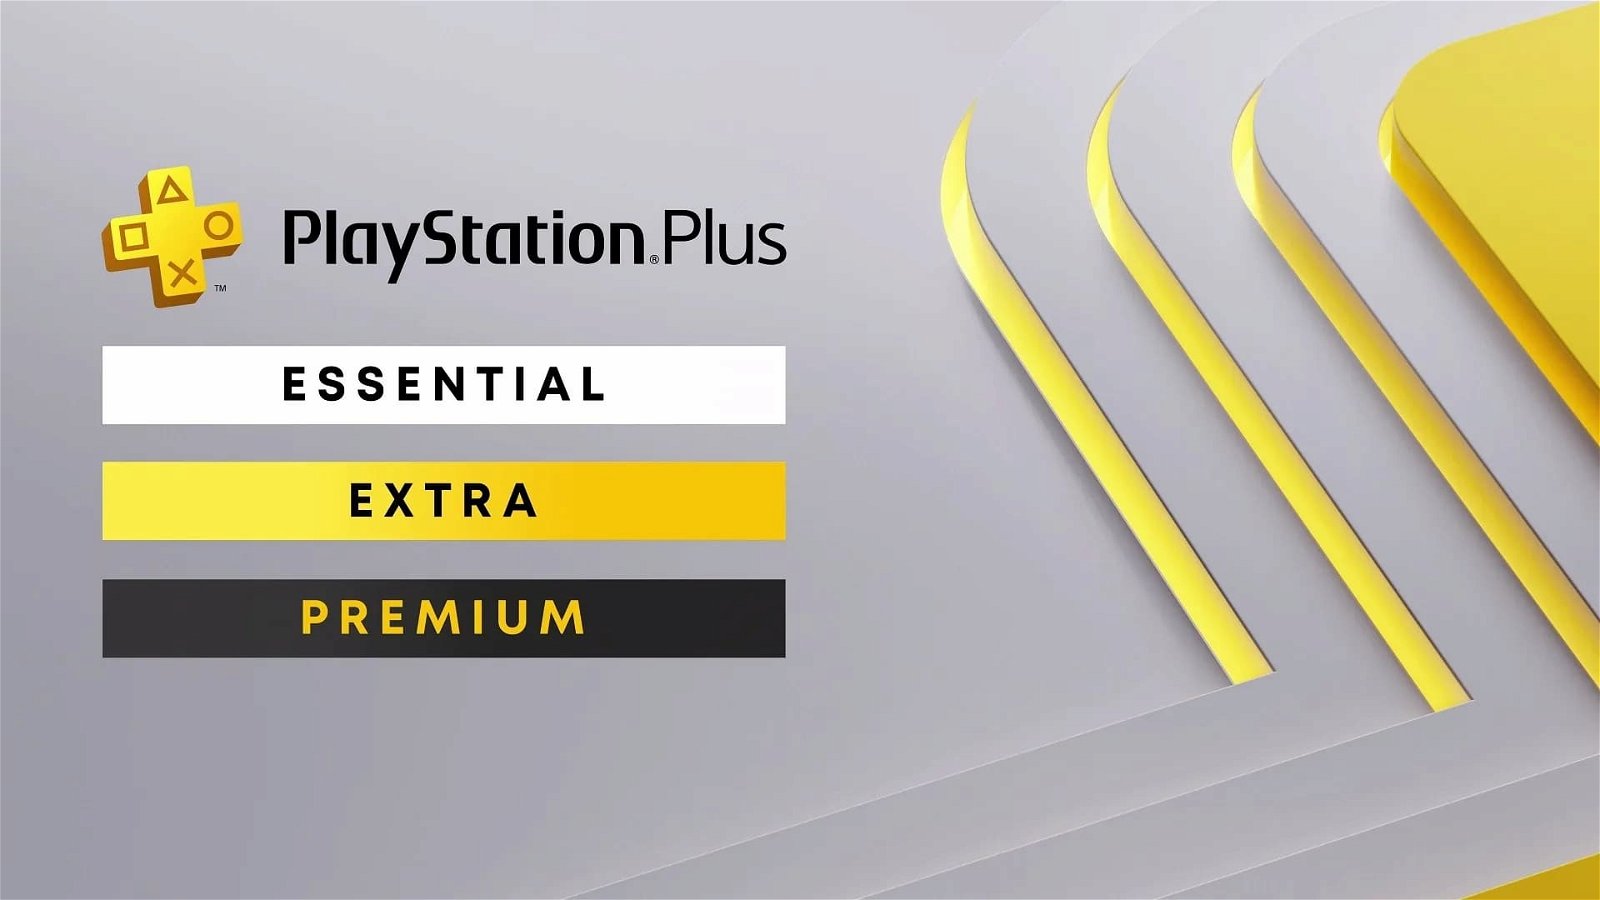 Sony reveals how long PlayStation Plus could take to compete with Xbox Game Pass